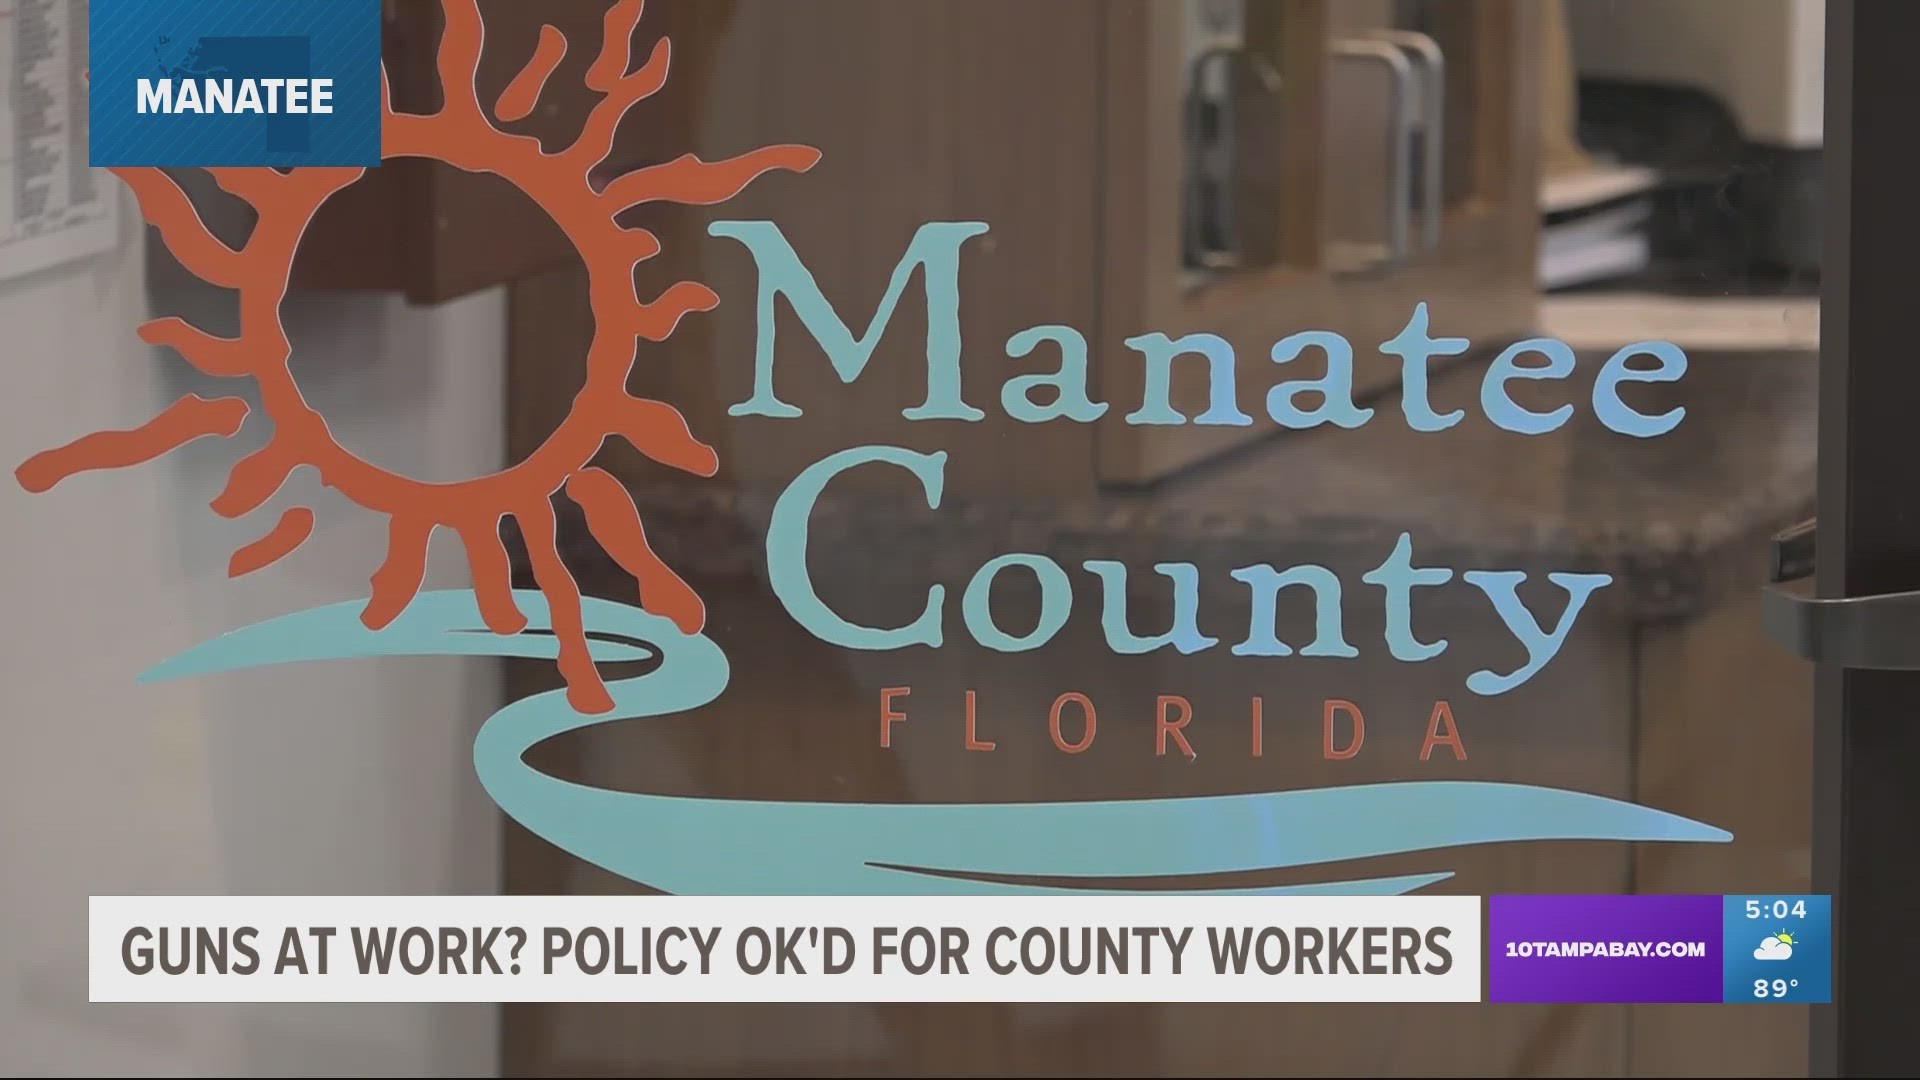 Beginning in a few weeks, most Manatee County employees will not have to leave their guns in their cars when they come to work.